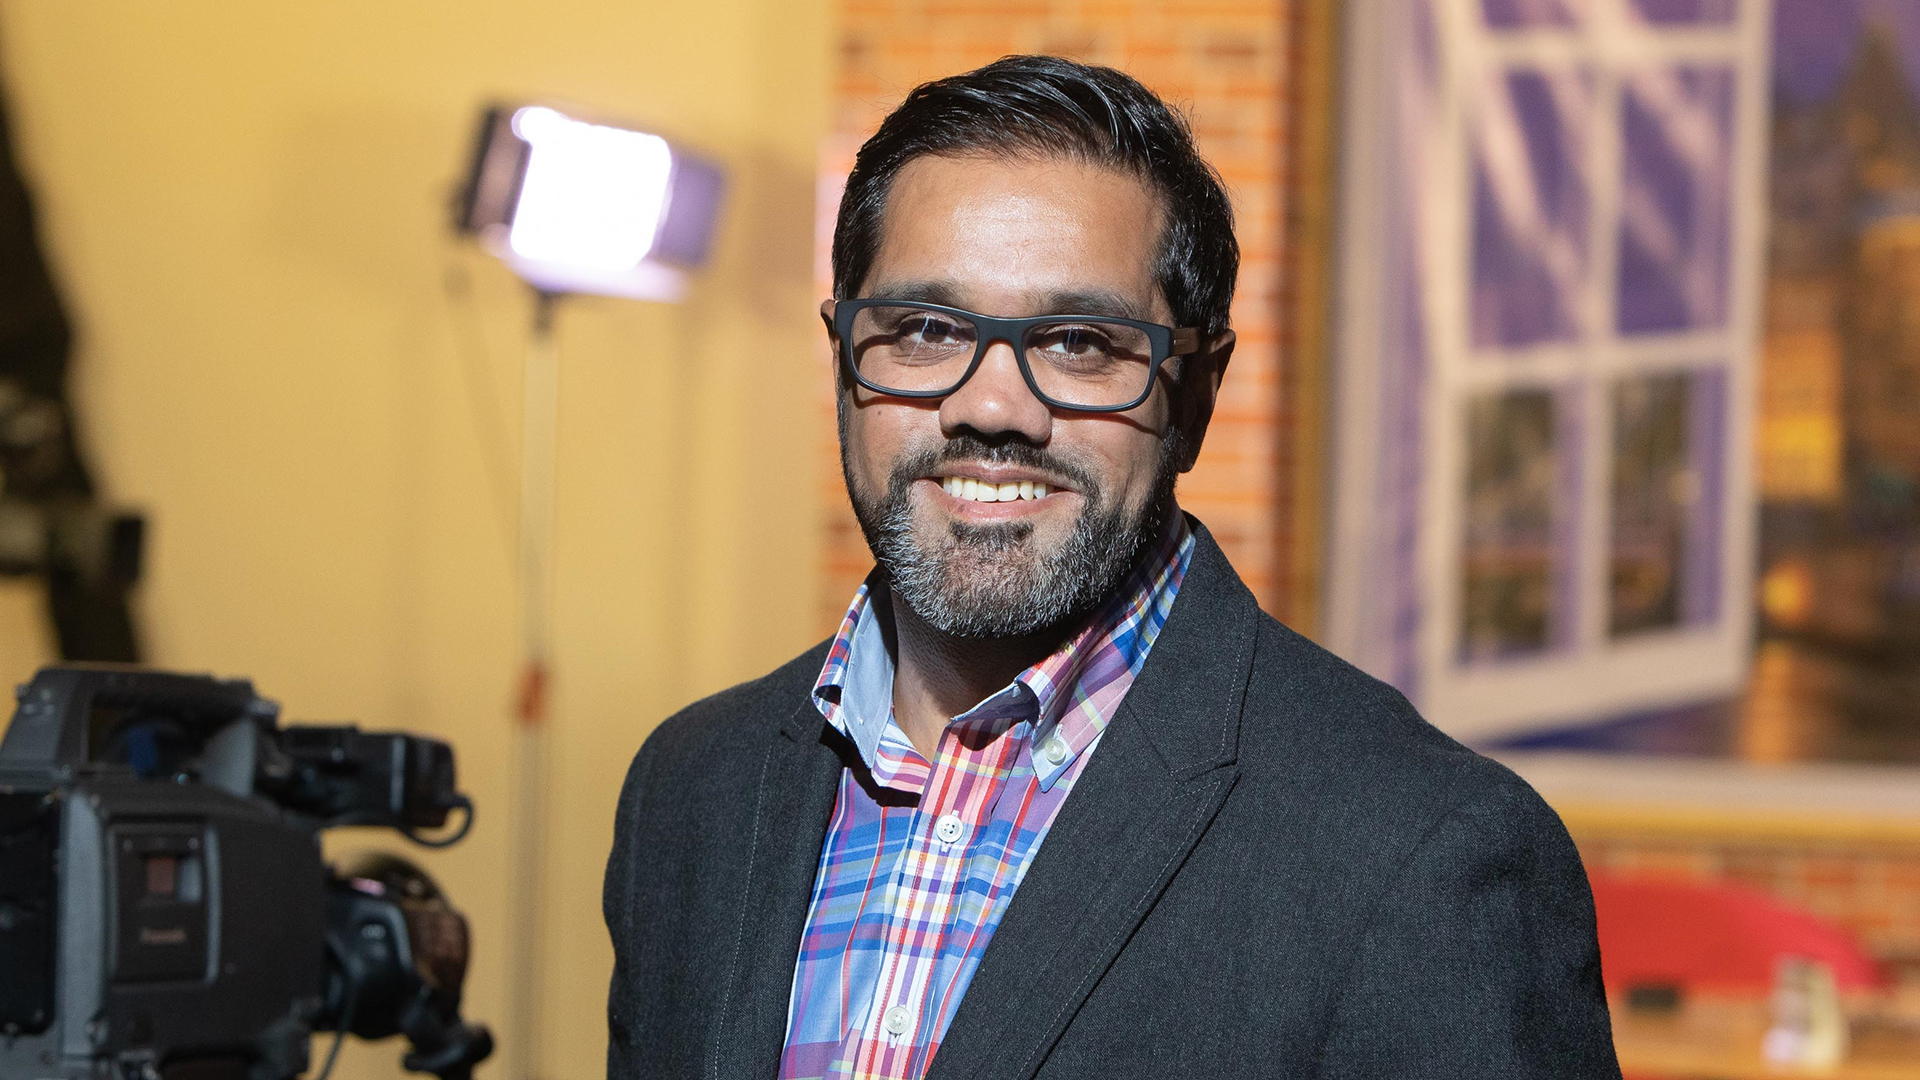 Rohit Sagoo has a background as a children’s nurse and now teaches others looking to specialise in that area – he is also founder and director of British Sikh Nurses. Image: Rohit Sagoo